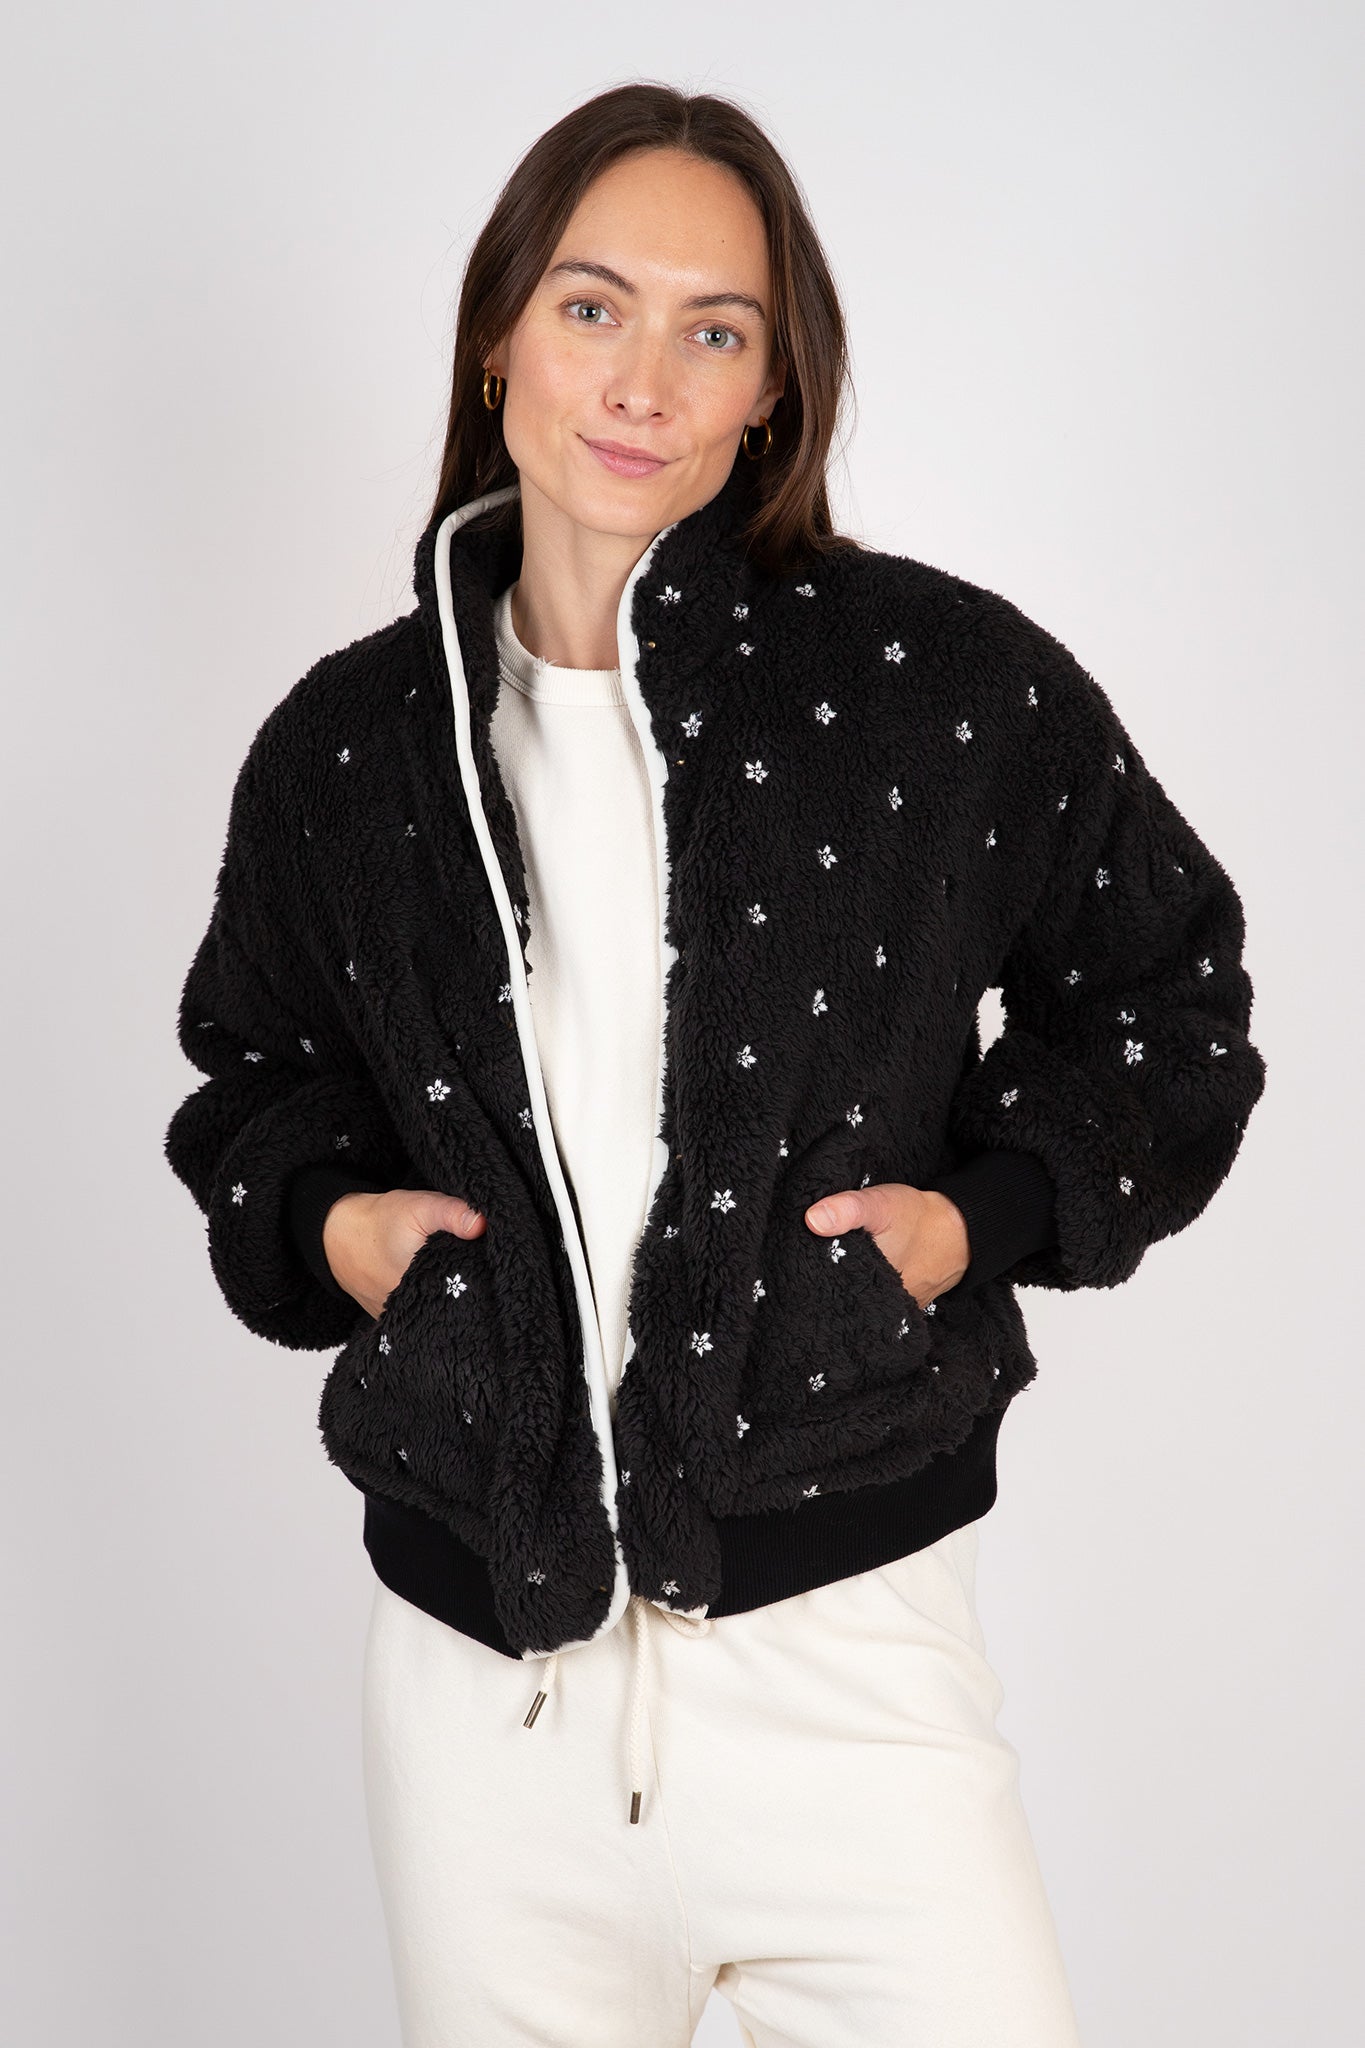    The-Great-The-Blackbird-Jacket-Black-with-Cream-FLORAL-EMBROIDERY